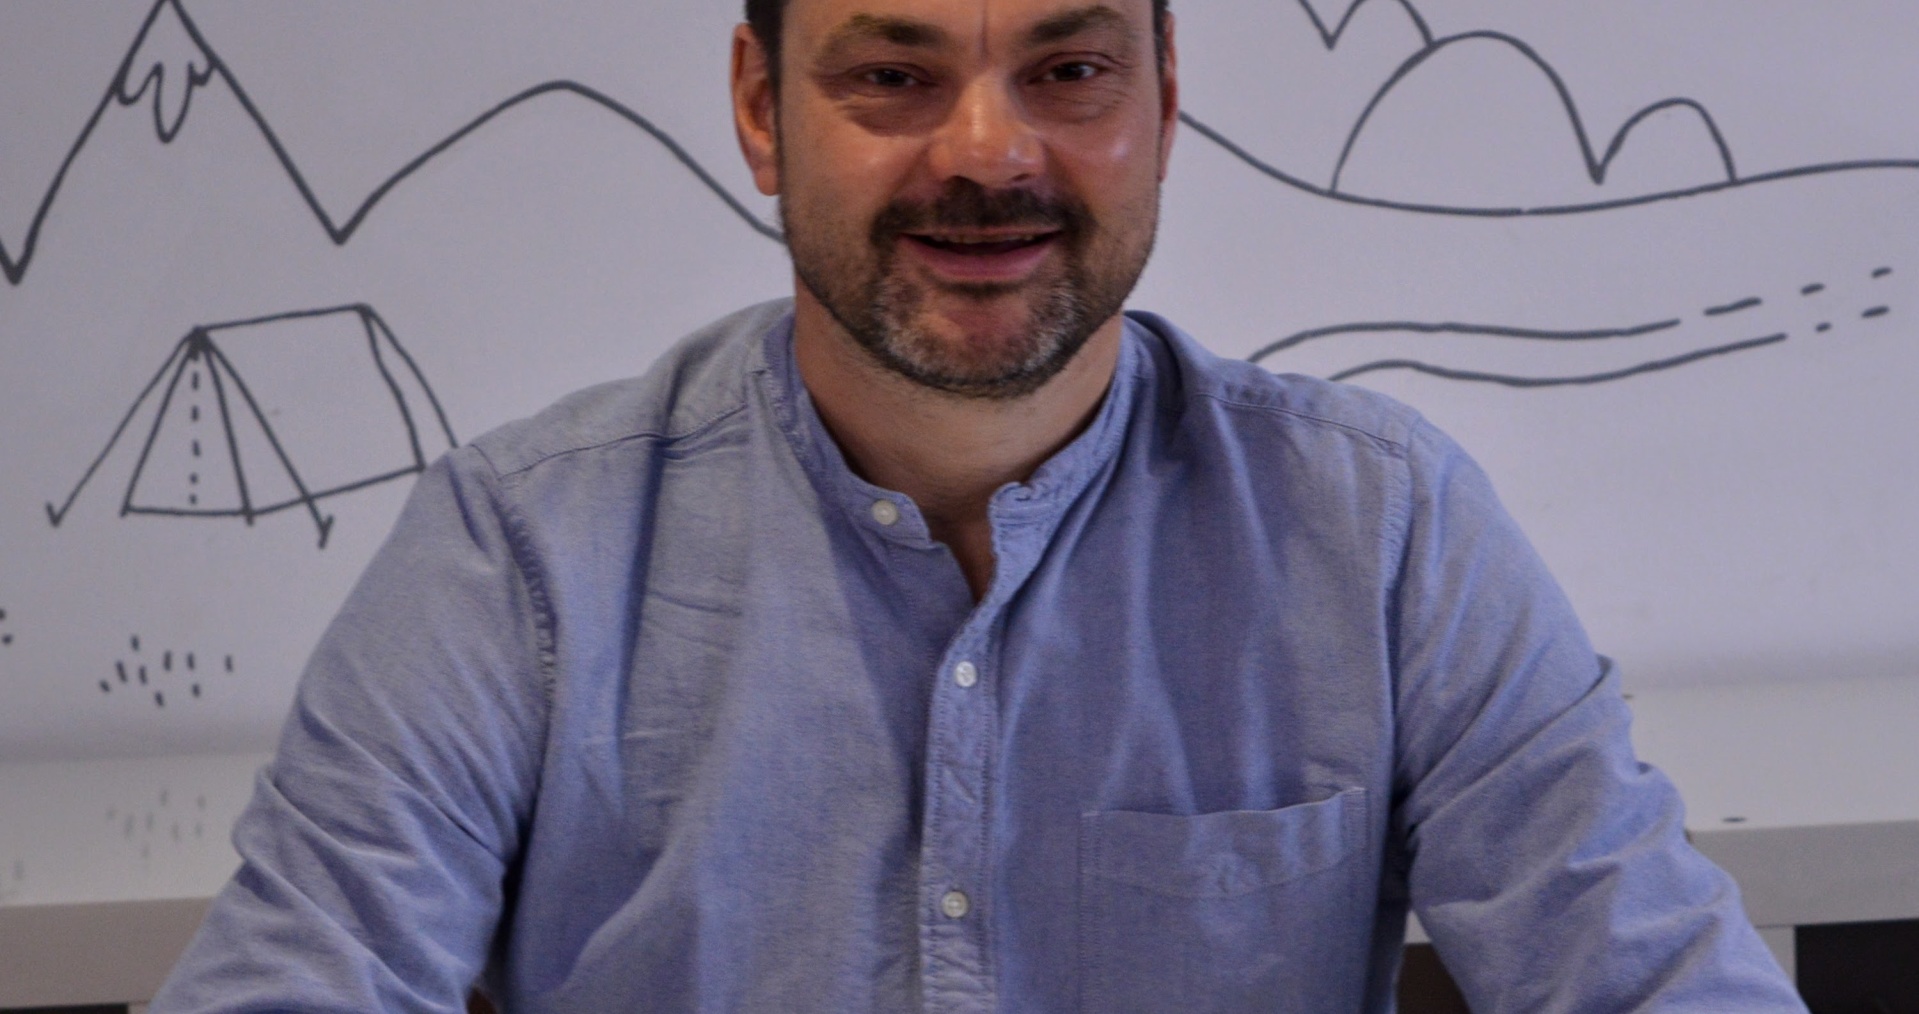 Justin wears a light blue shirt, has short dark hair and a short dark brown beard. He sits smiling with his hands clasped in front of him on a white desk.